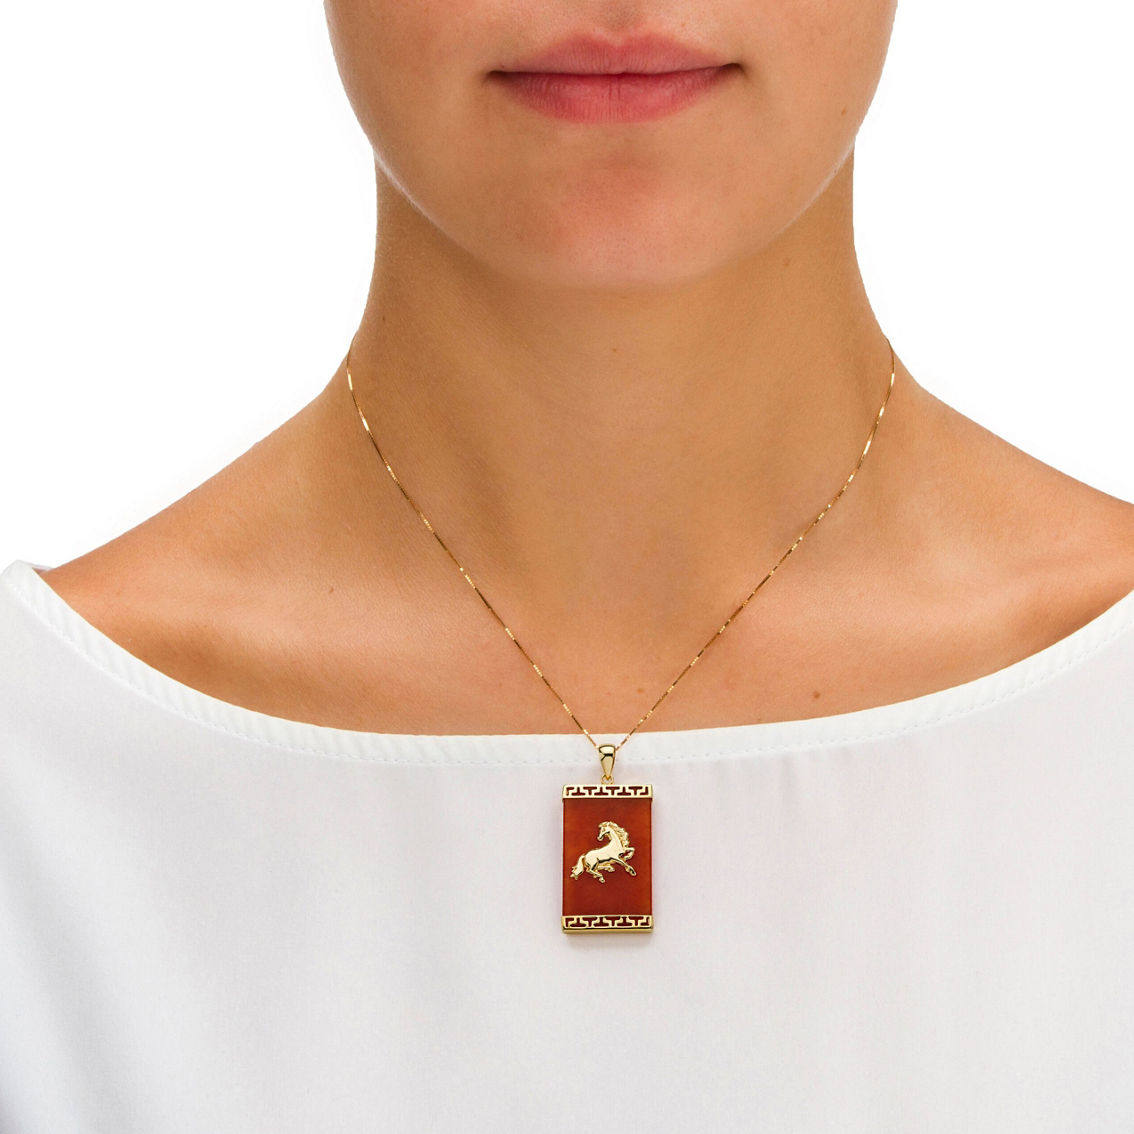 Genuine Red Jade 14k Yellow Gold Charm Horse Pendant - Image 3 of 4